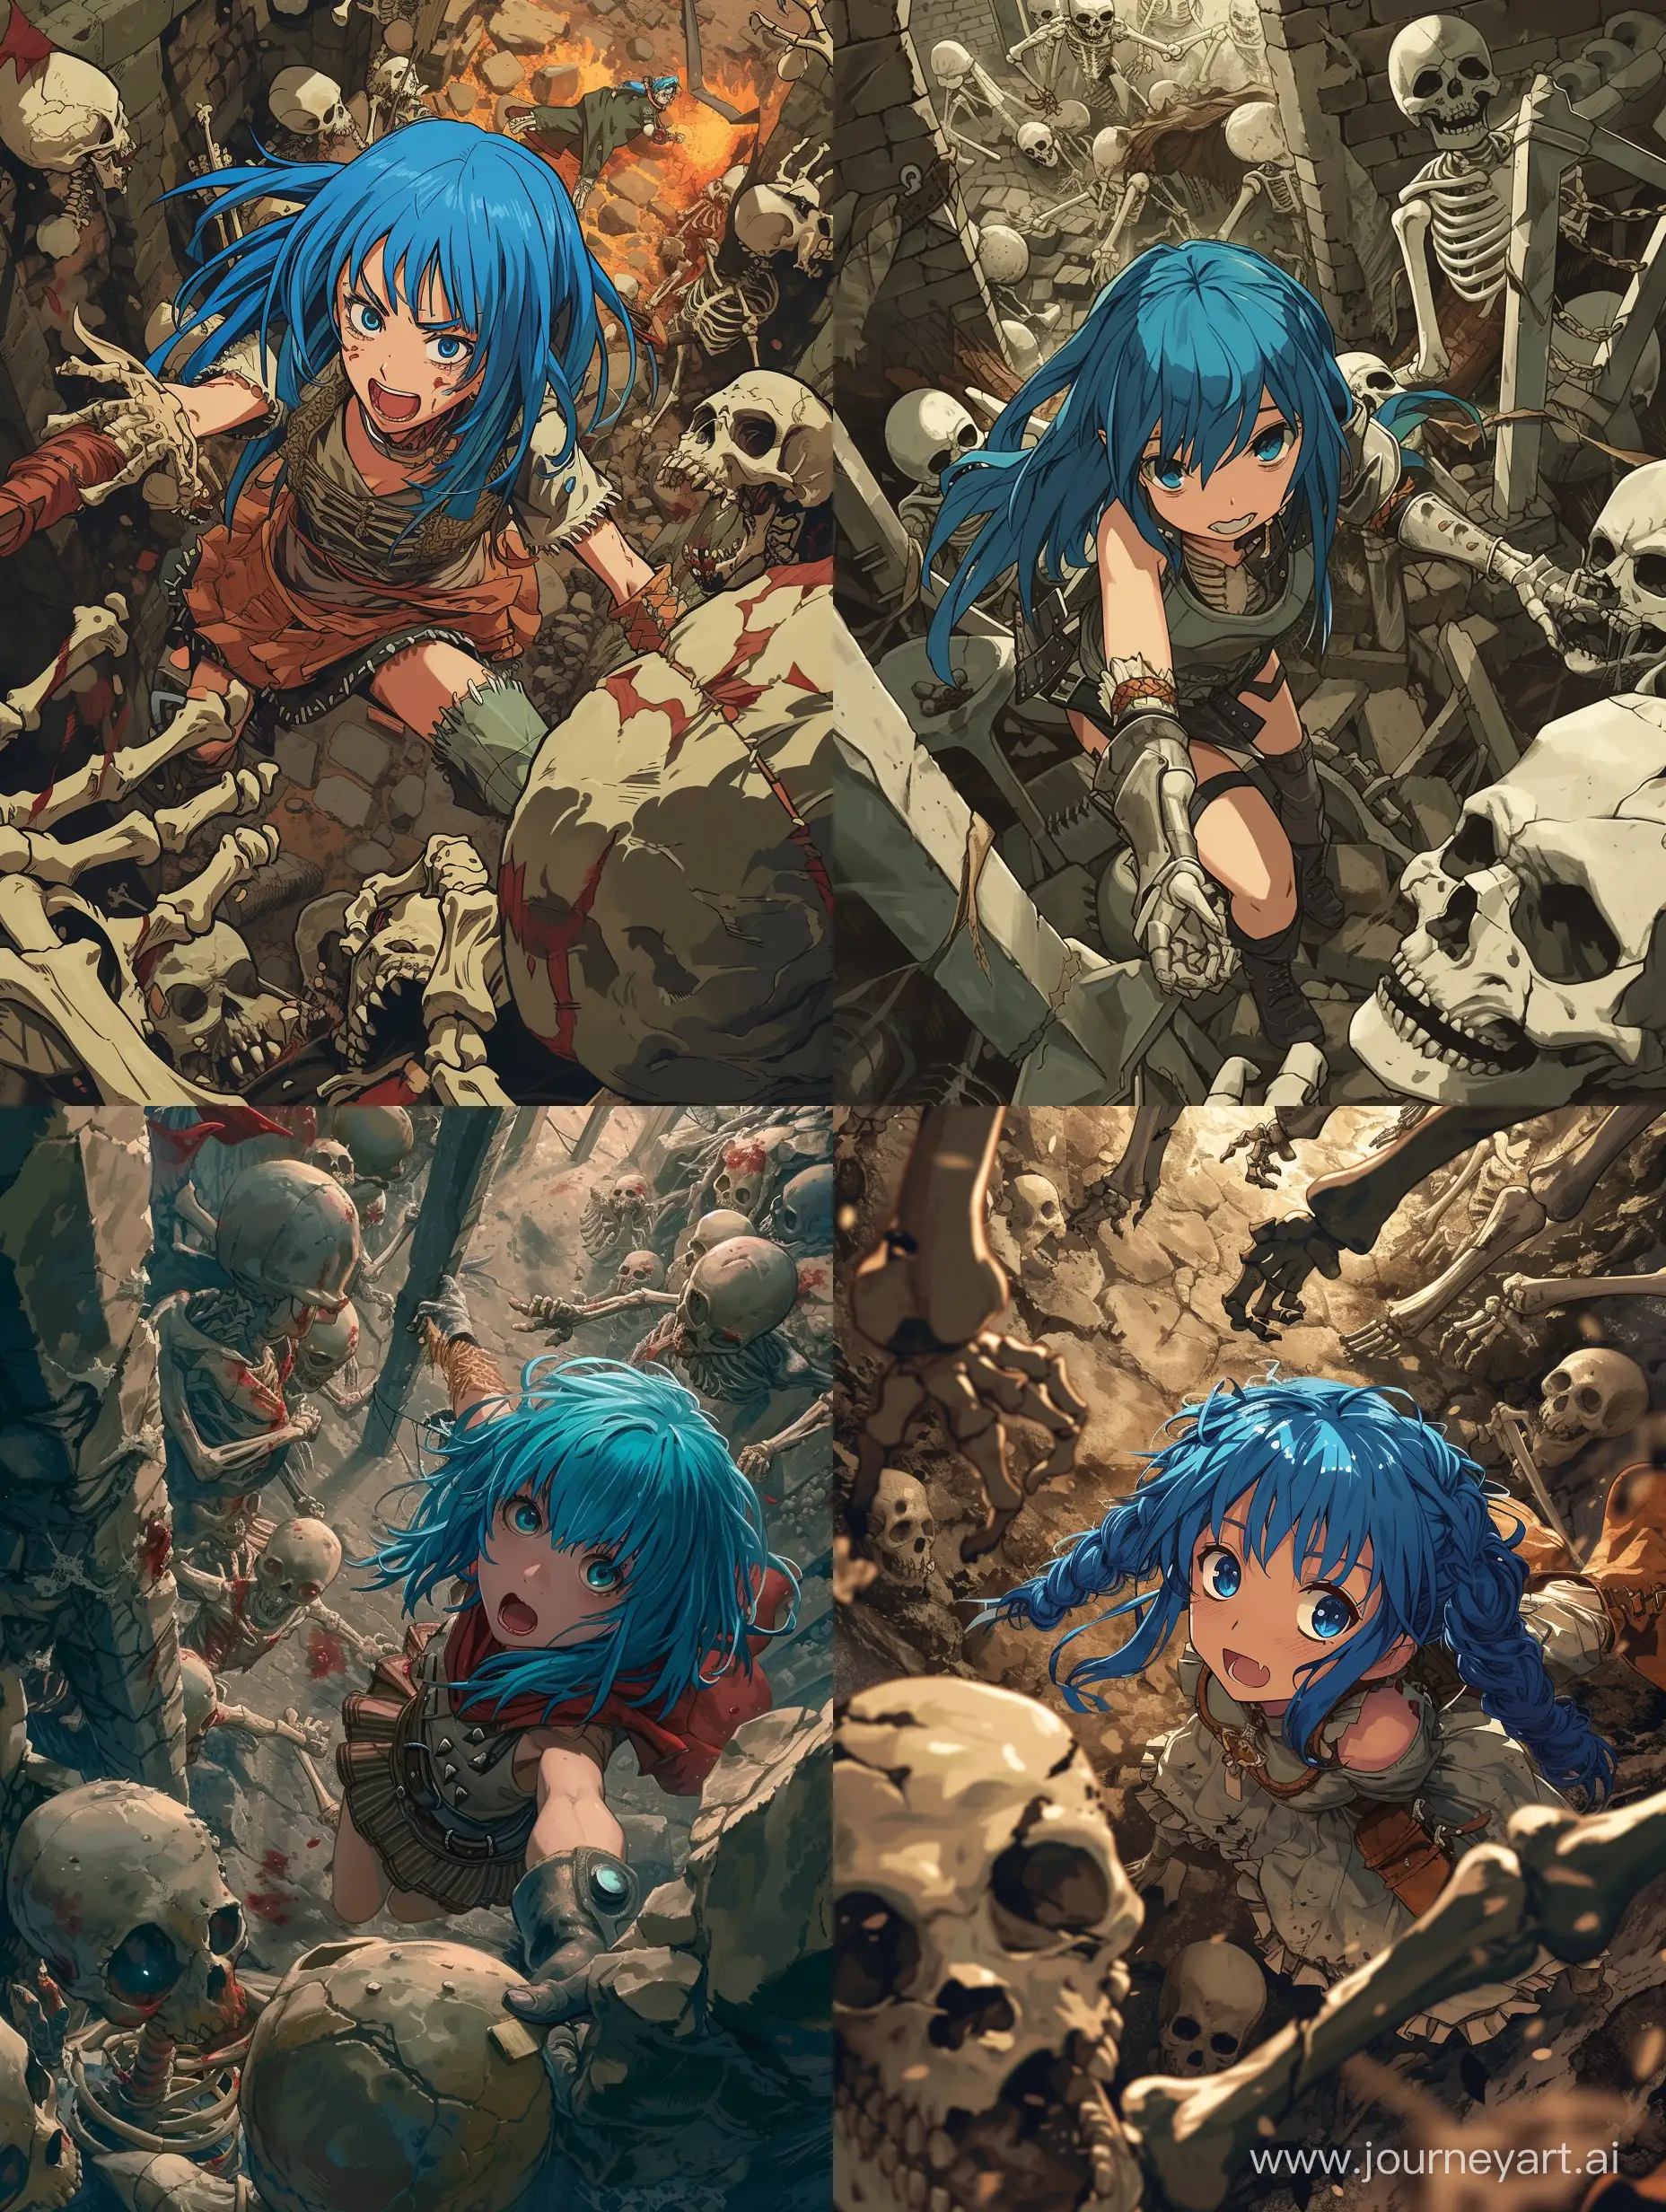 Courageous-BlueHaired-Anime-Adventurer-Confronts-Dungeon-Horrors